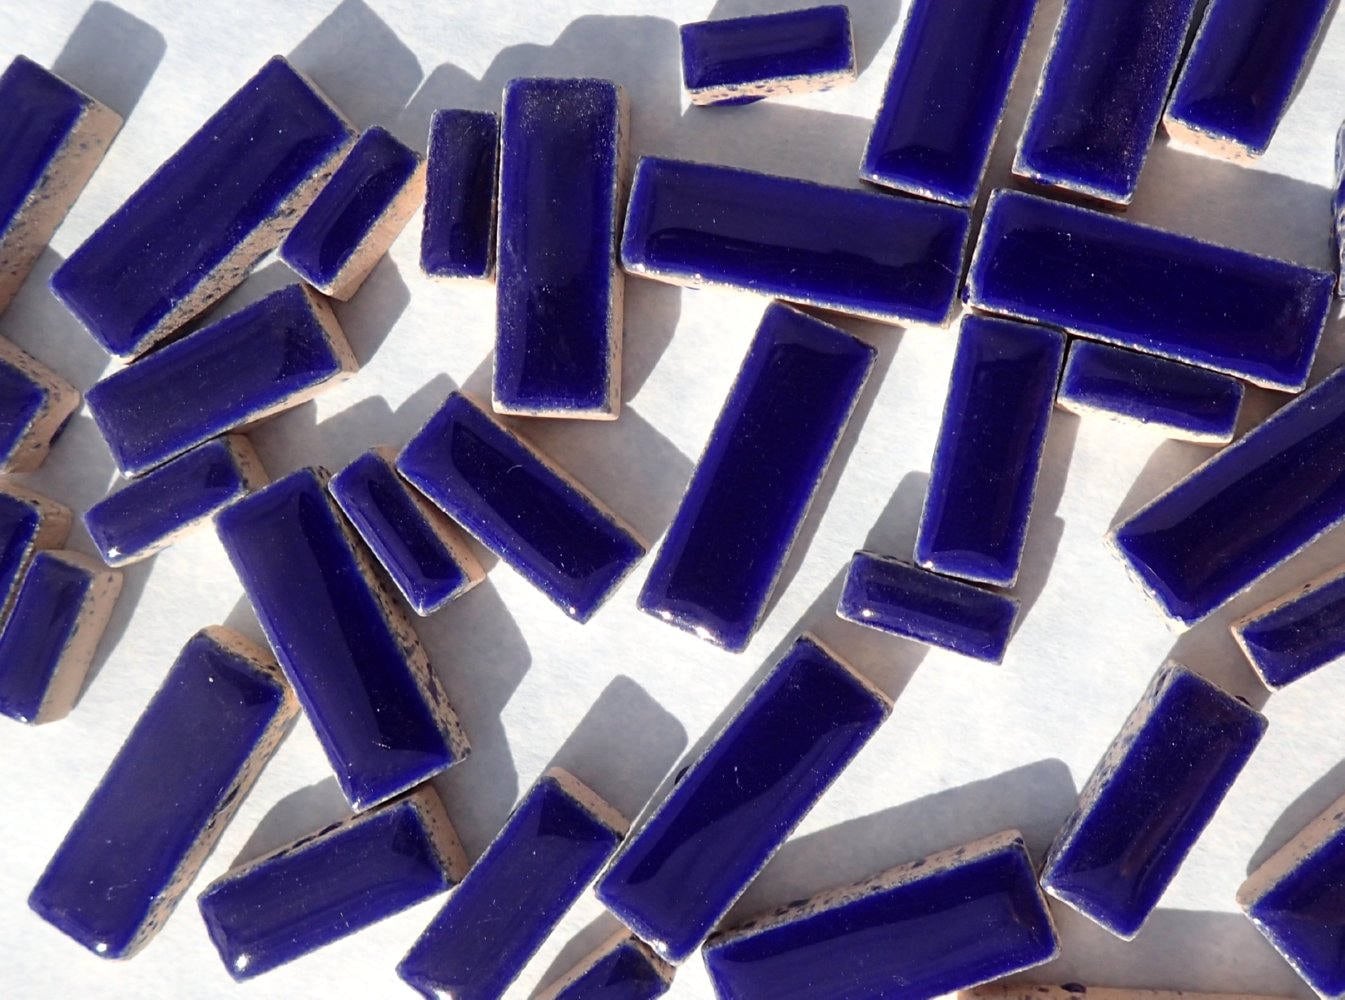 Dark Blue Mini Rectangles Mosaic Tiles - 50g Ceramic in Mix of 3 Sizes 3/8" and 5/8" and 3/4" in Indigo